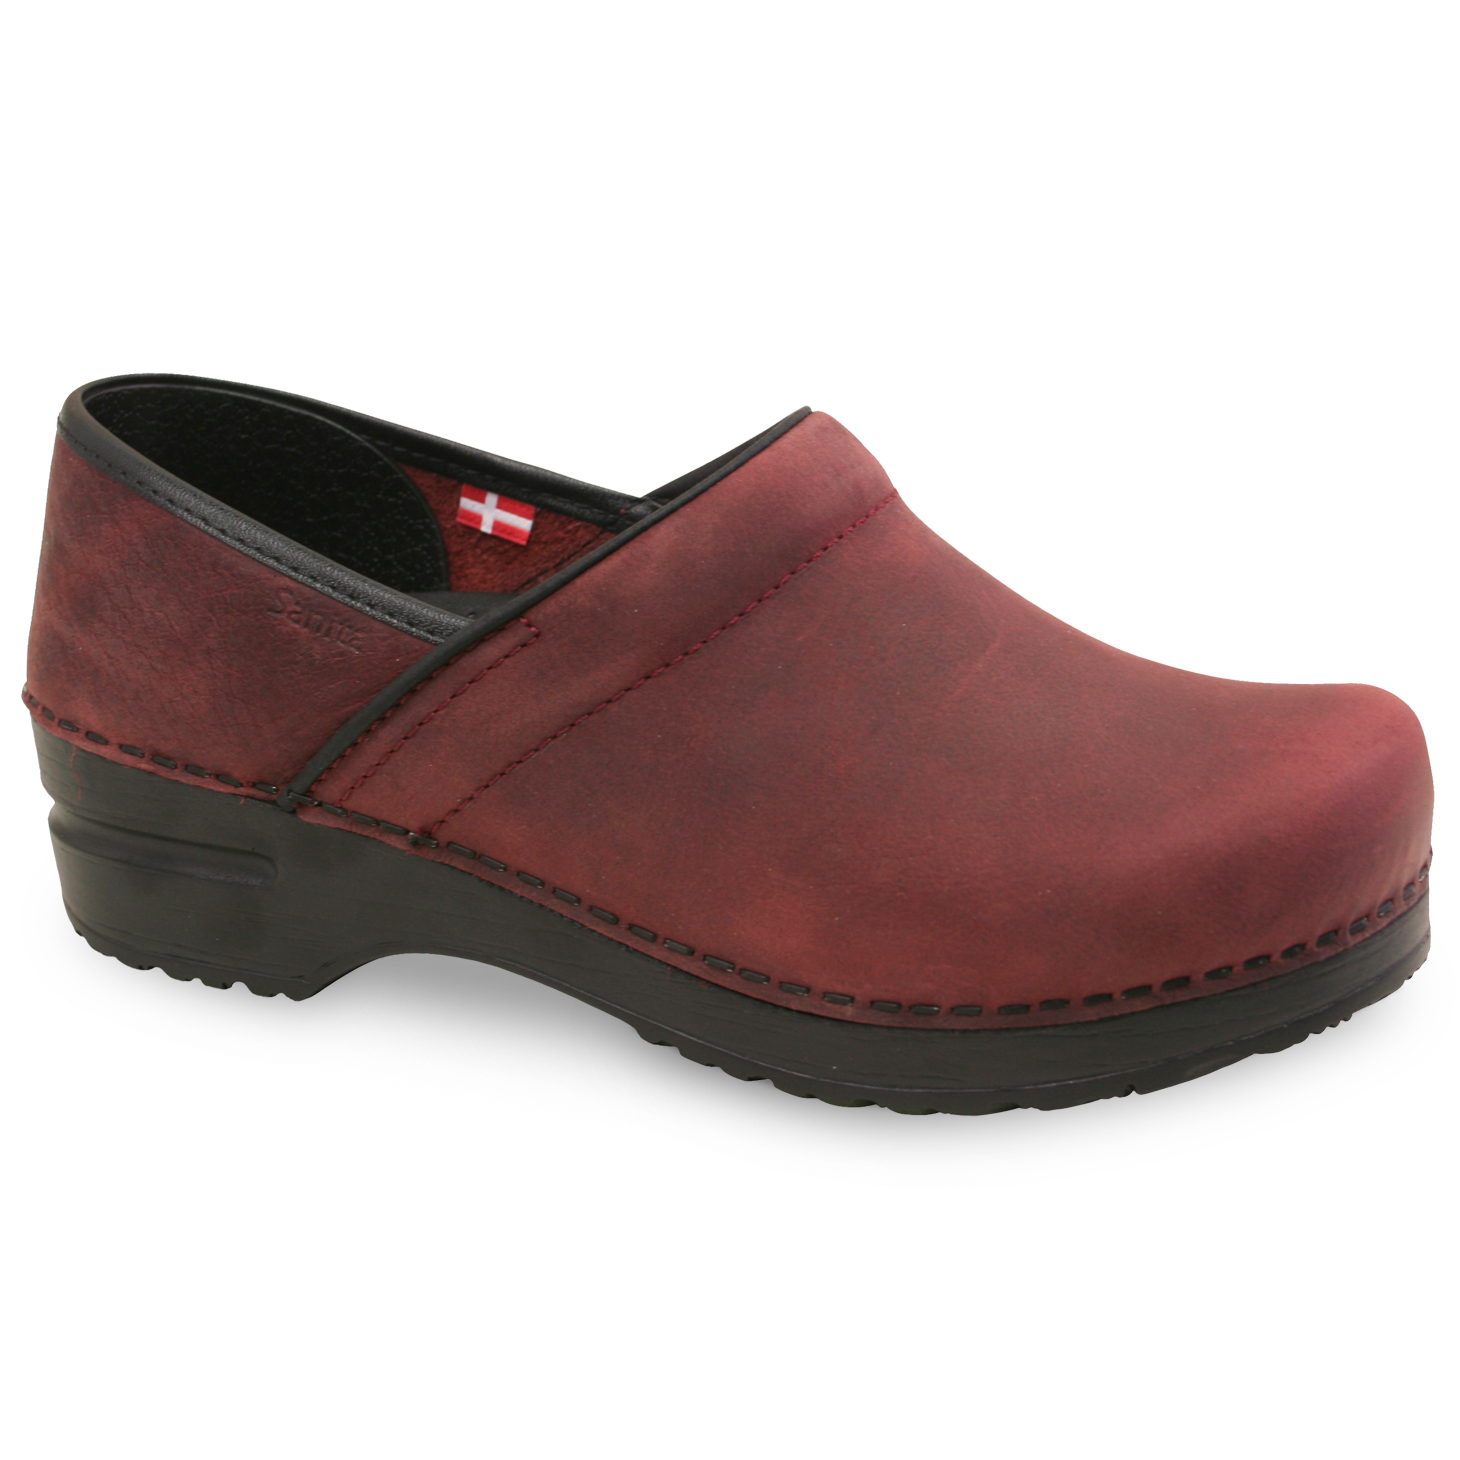 Sanita Pro. Oiled Leather Women's in Port Closed Back Clog